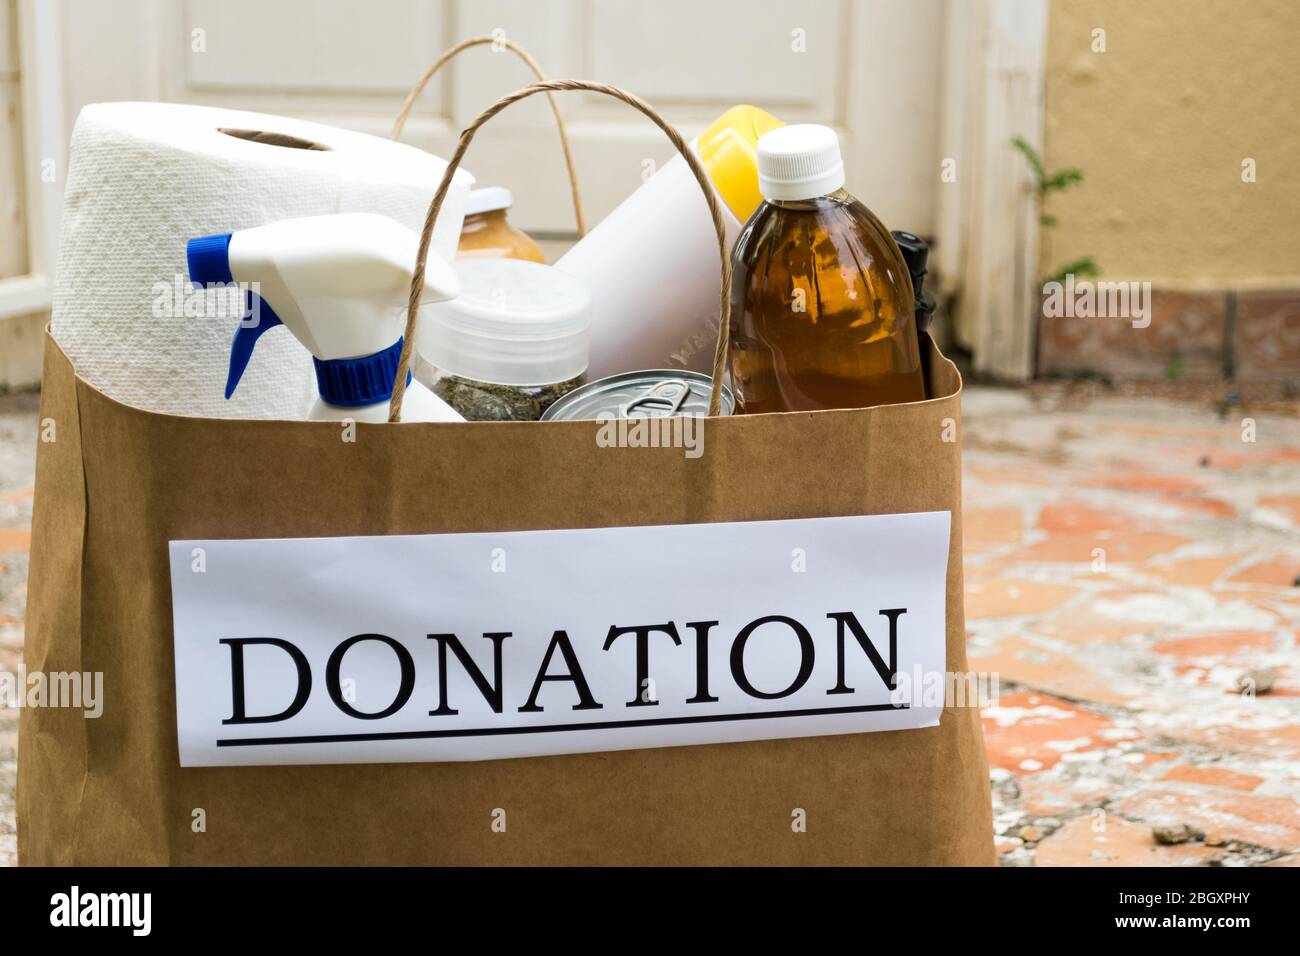 A donation bag filled with food and cleaning supplies is delivered to a home during the Covid-19 / Coronavirus Pandemic Stock Photo